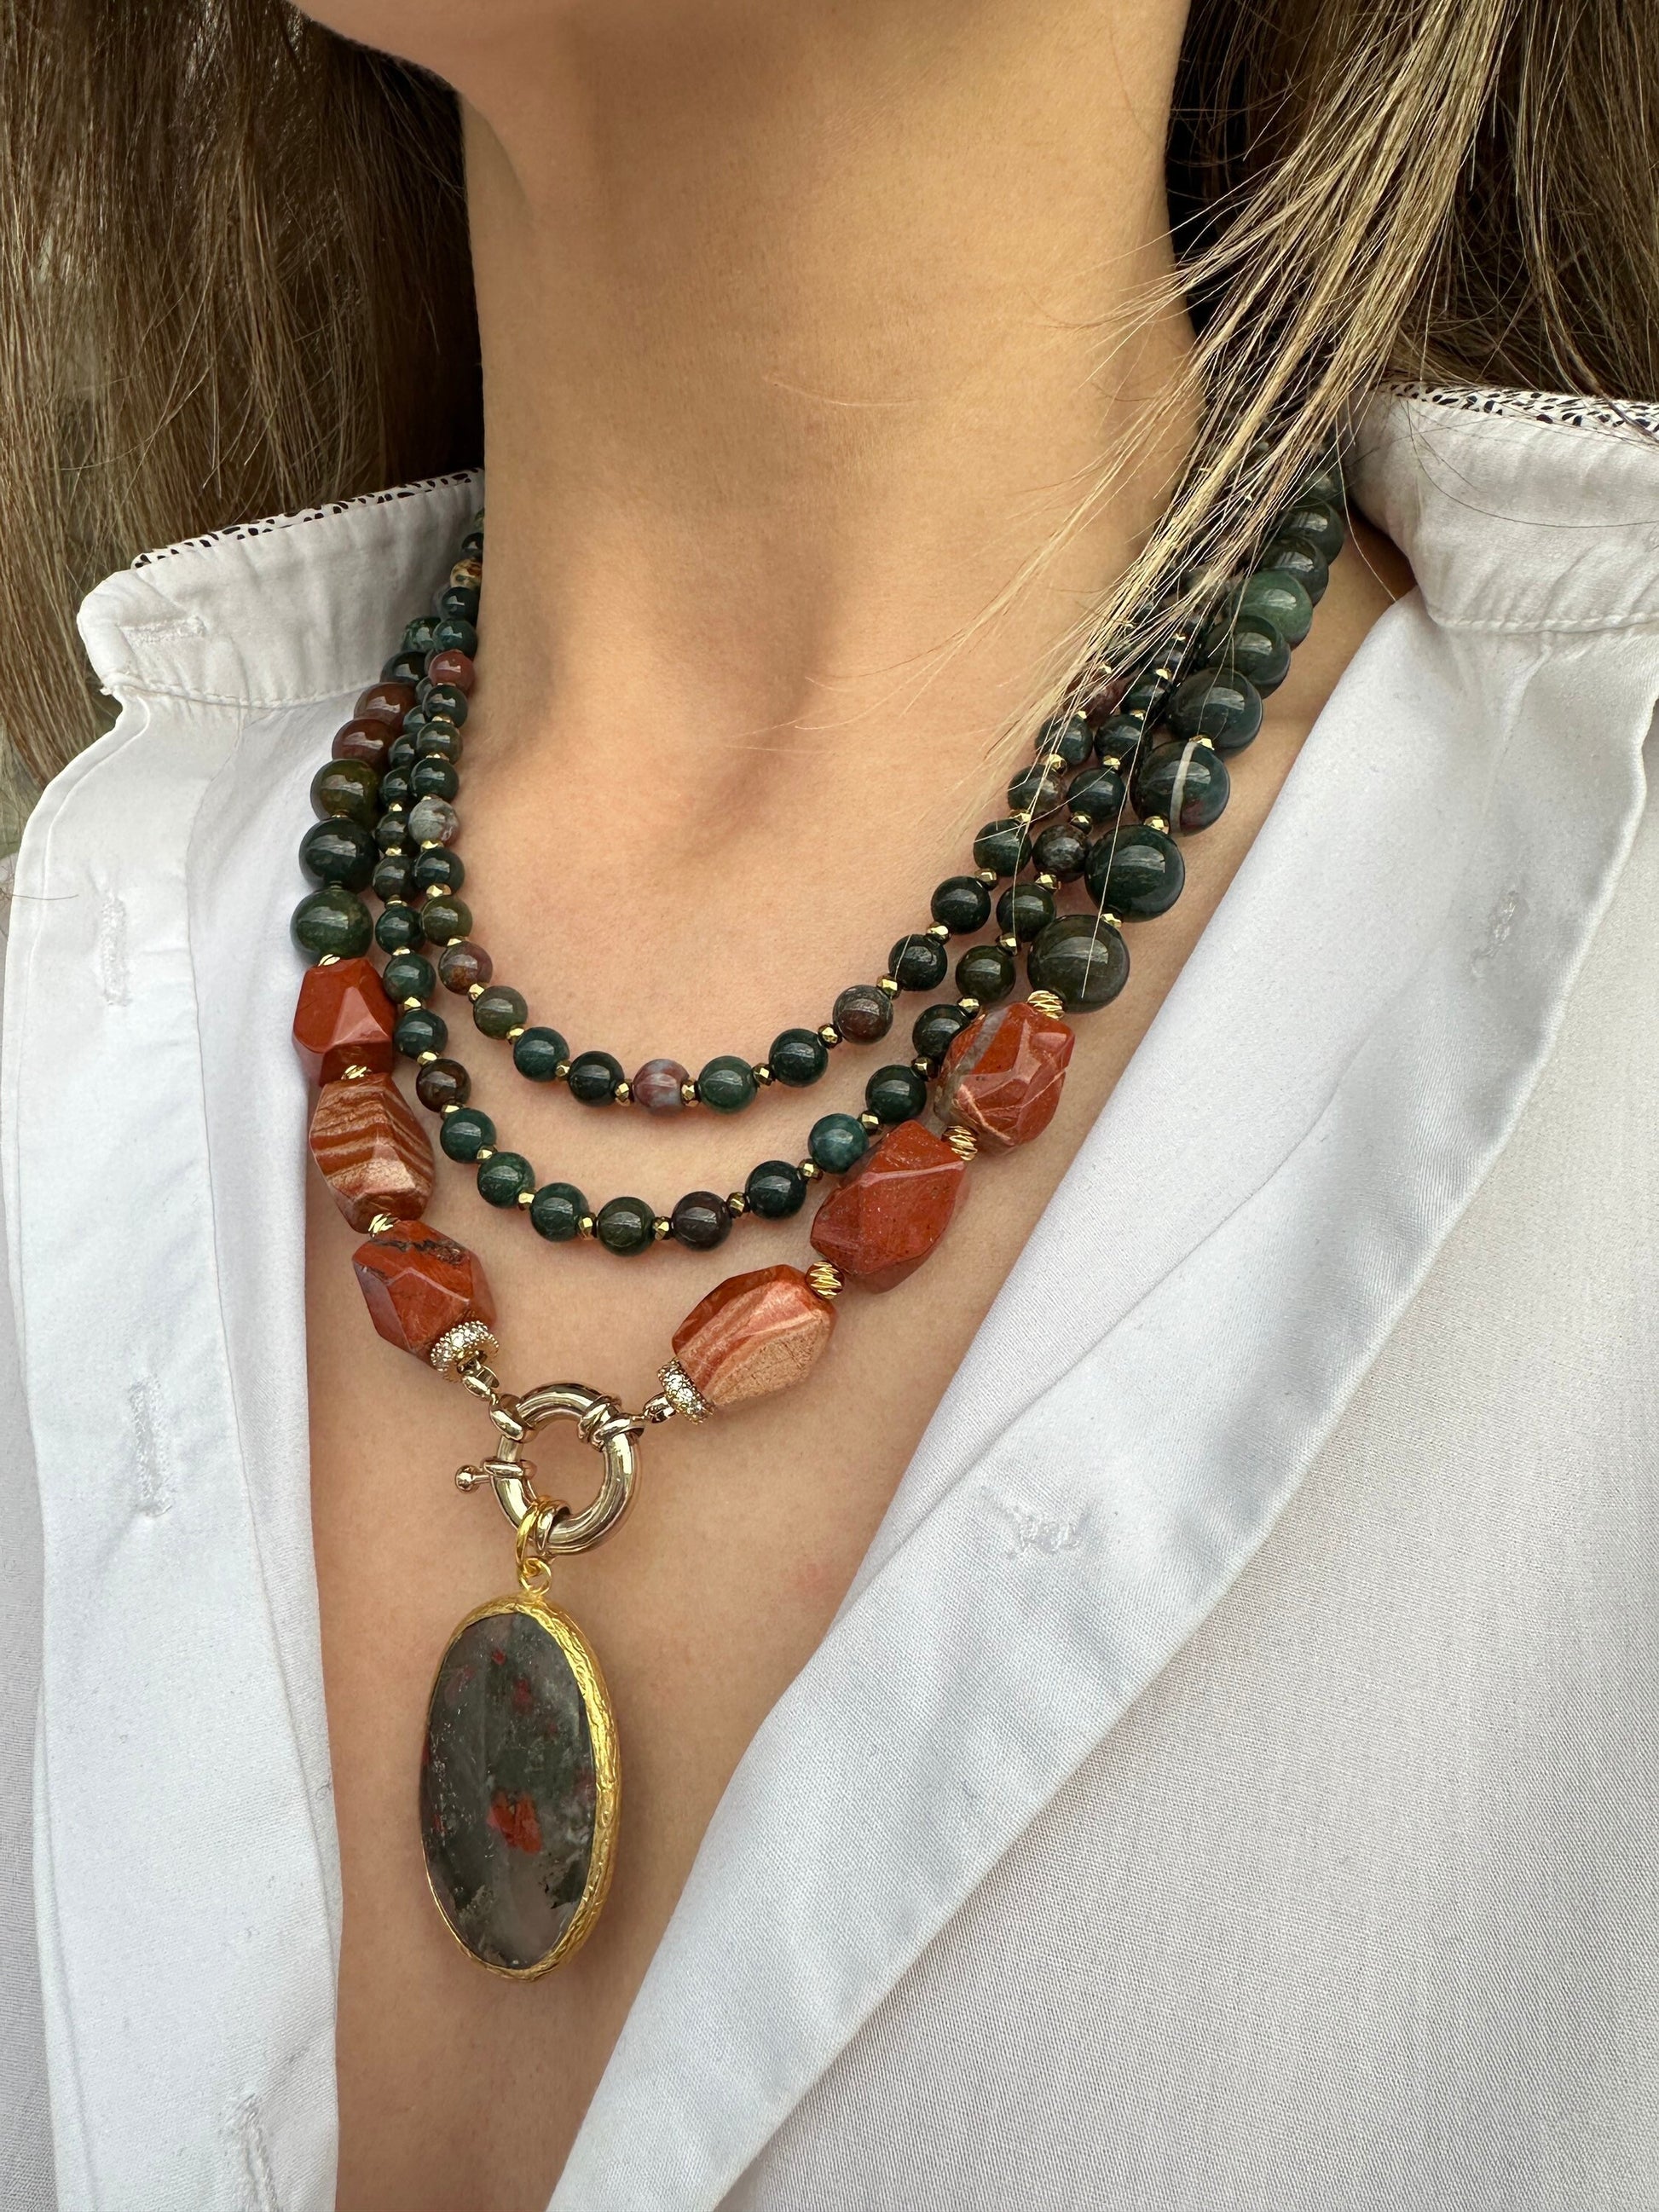 Blood Stone Necklace, Dark Green Multistrand Jewelry for Special Gifts, Handmade Jasper Statement Neclace, Beaded Gemstone Gifts